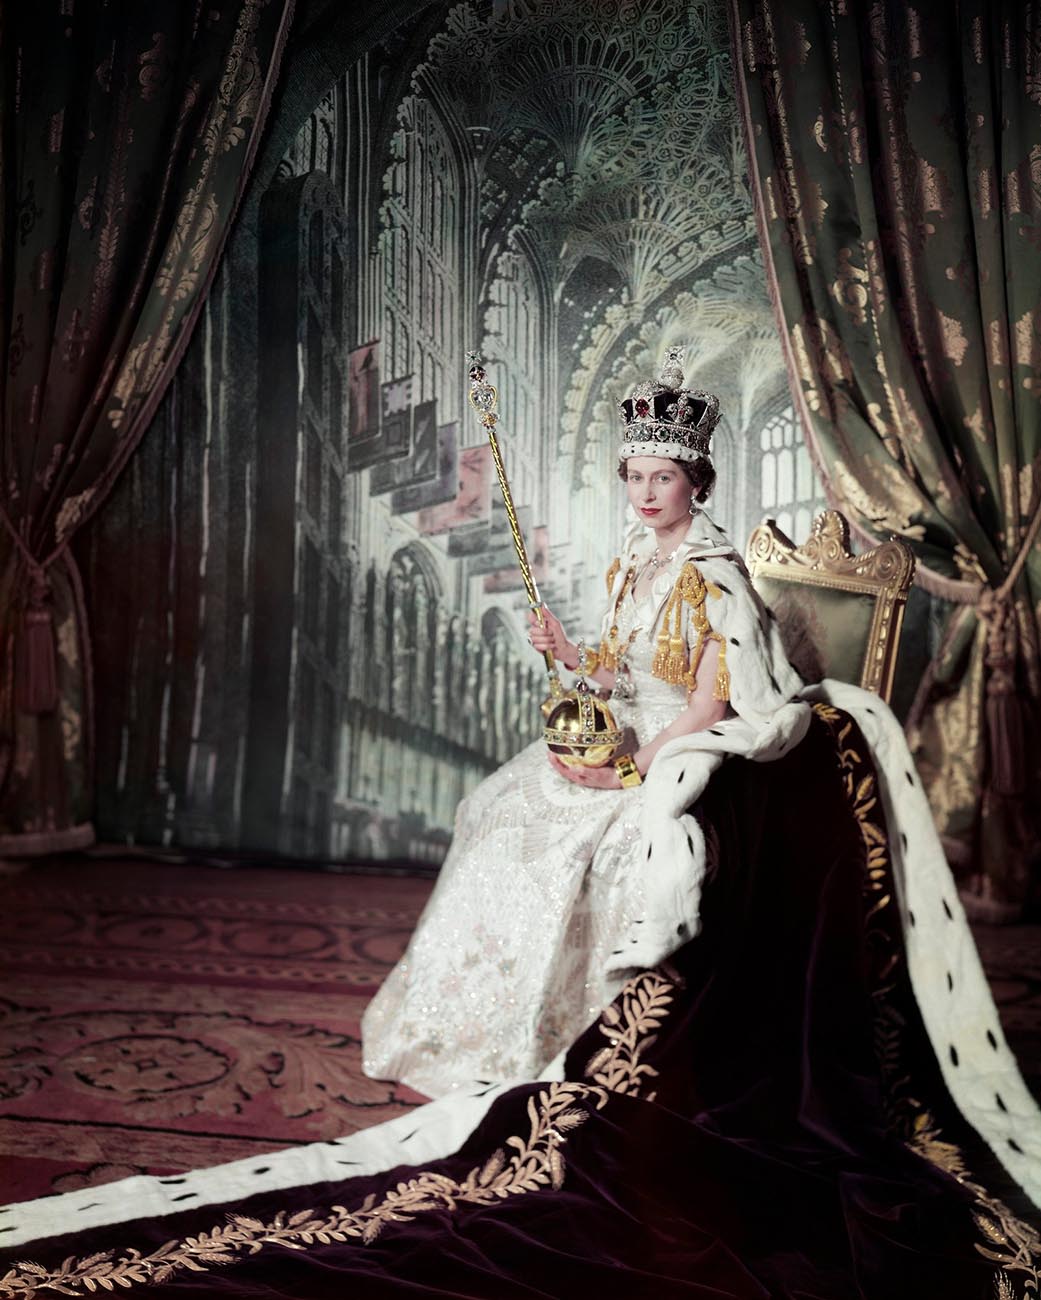 The History of Royal Family Portrait Photographs